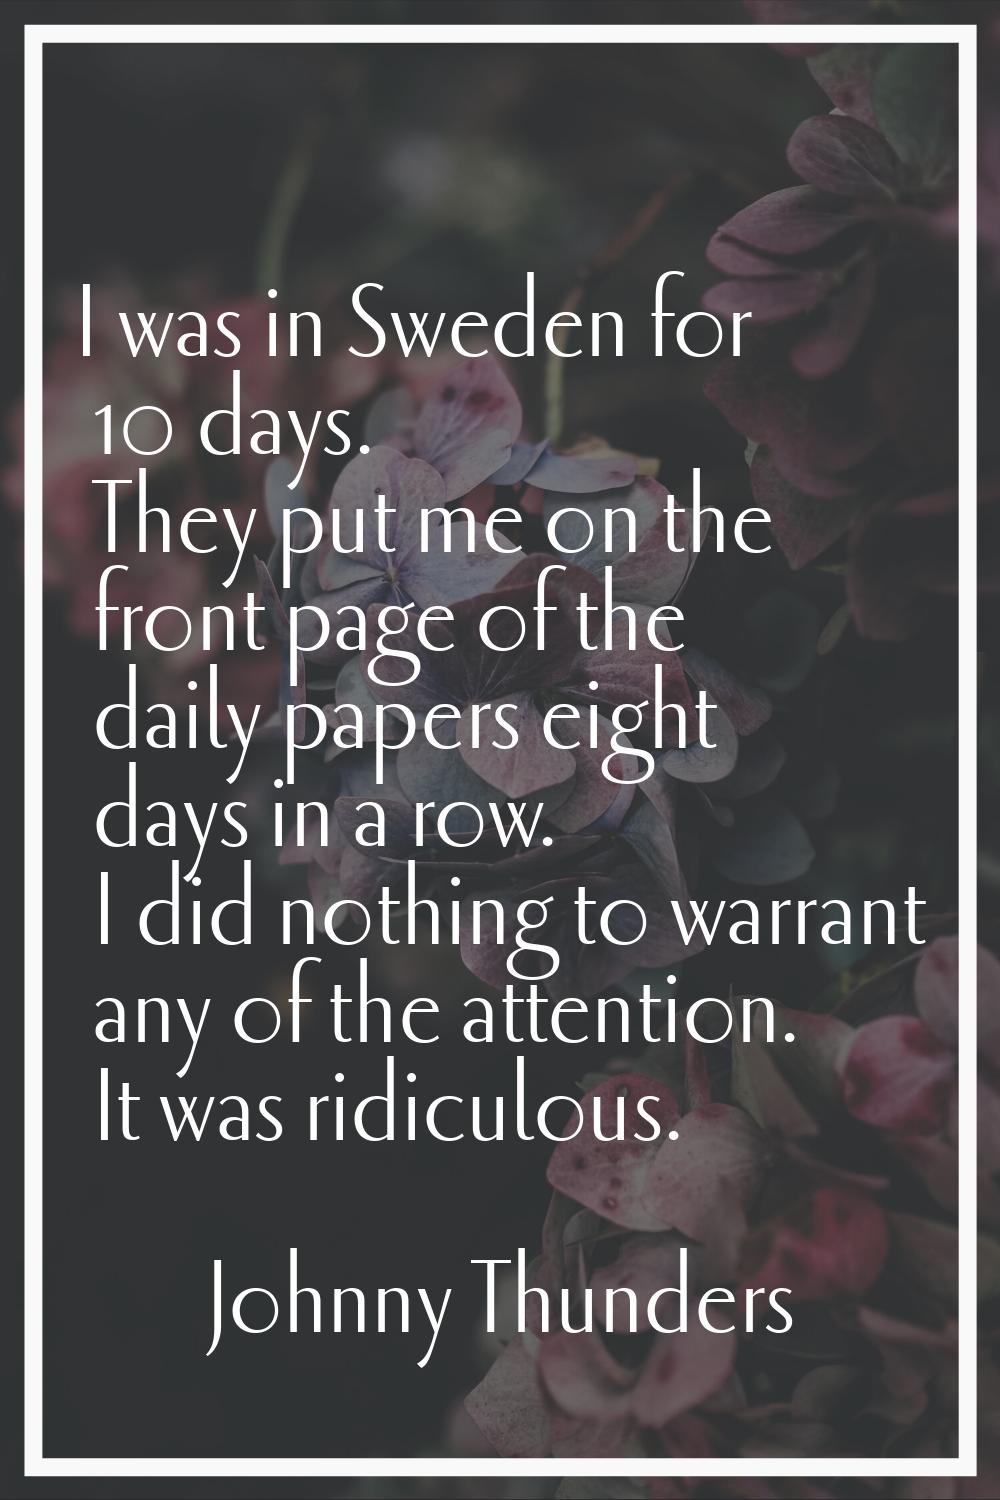 I was in Sweden for 10 days. They put me on the front page of the daily papers eight days in a row.